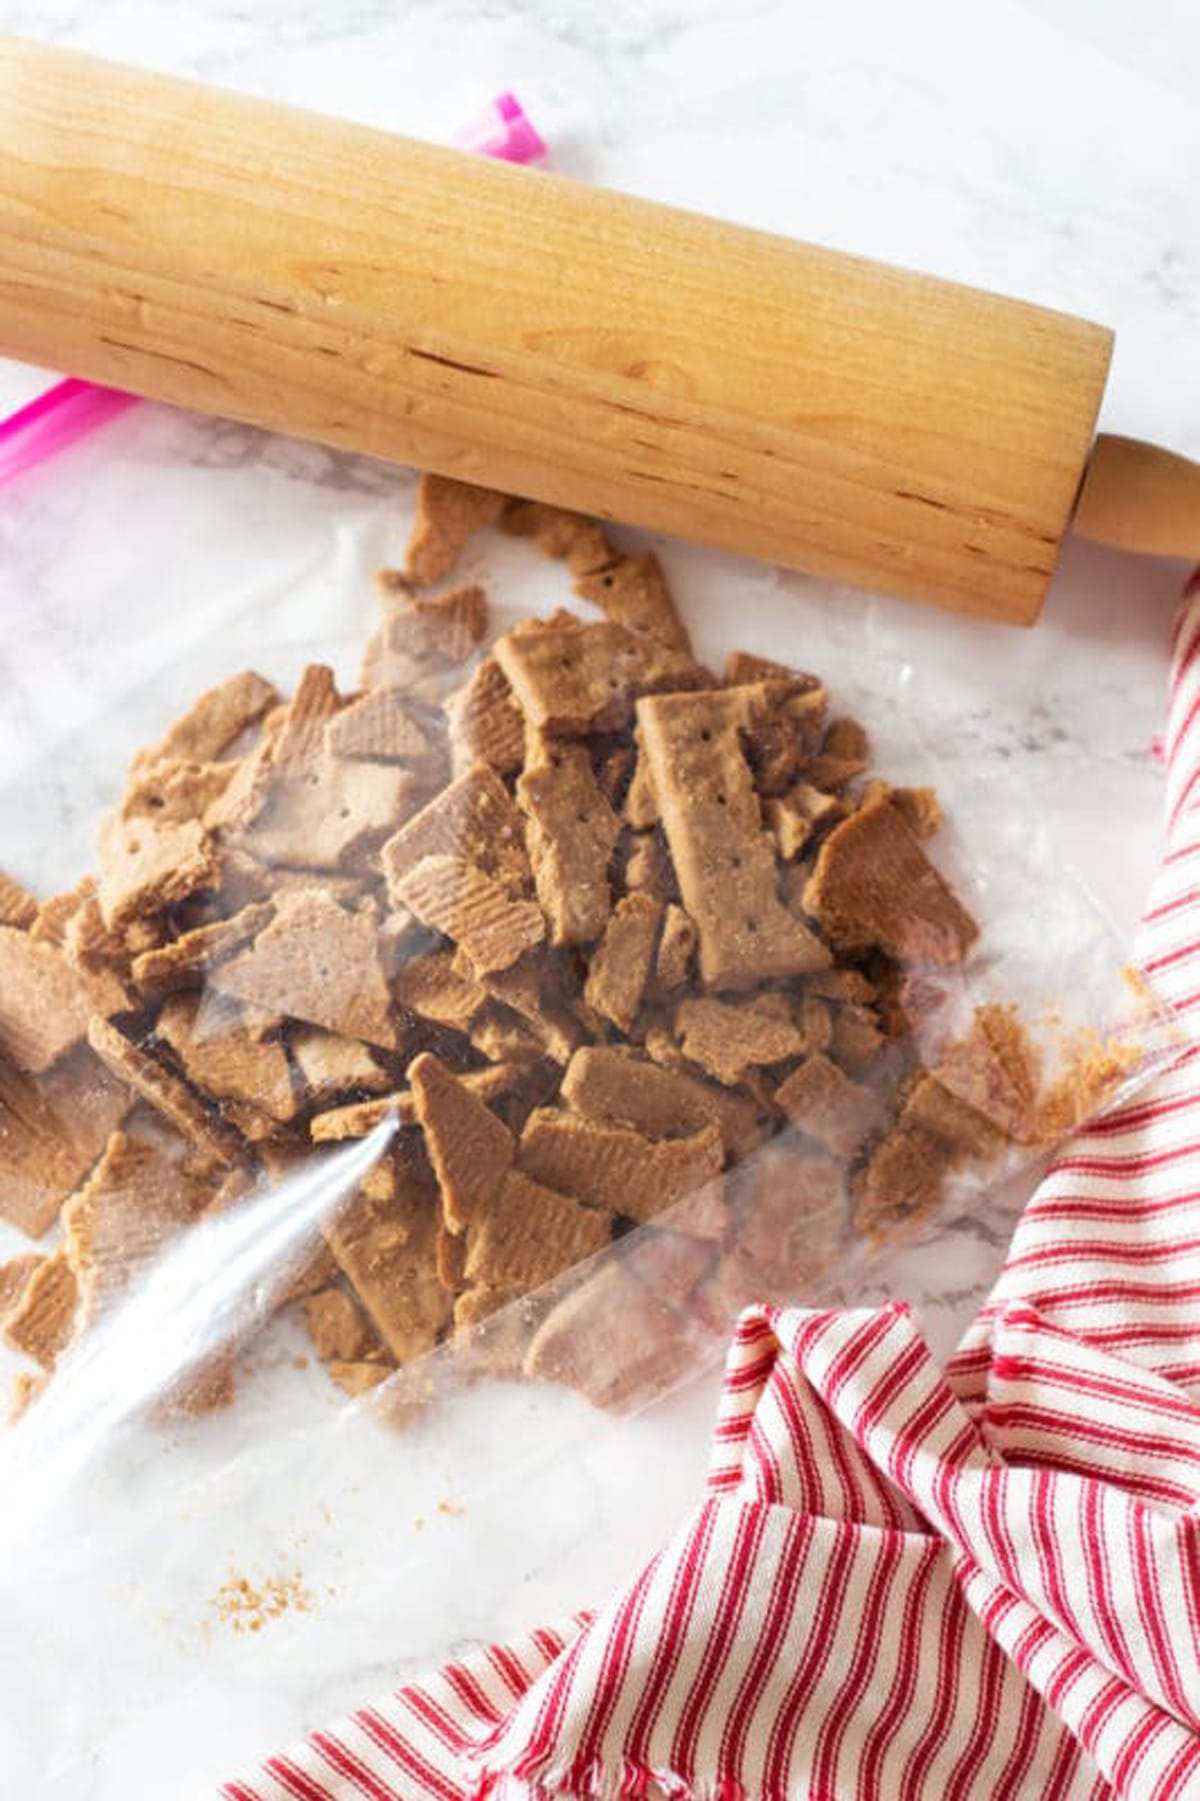 Ziplock bag containing crumbled graham crackers, rolling pin on table.